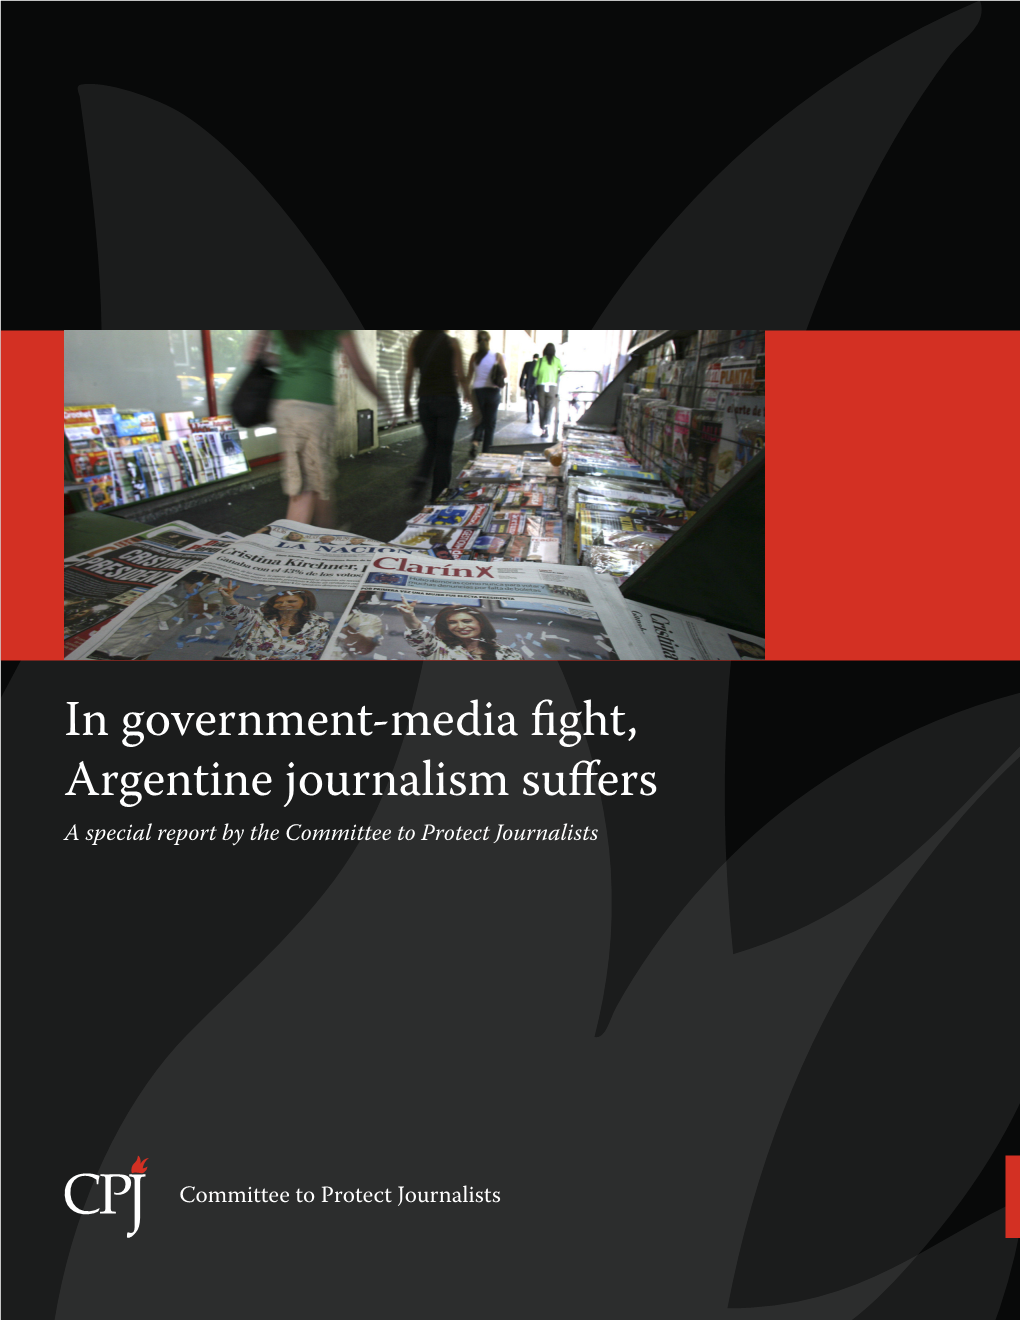 In Government-Media Fight, Argentine Journalism Suffers a Special Report by the Committee to Protect Journalists